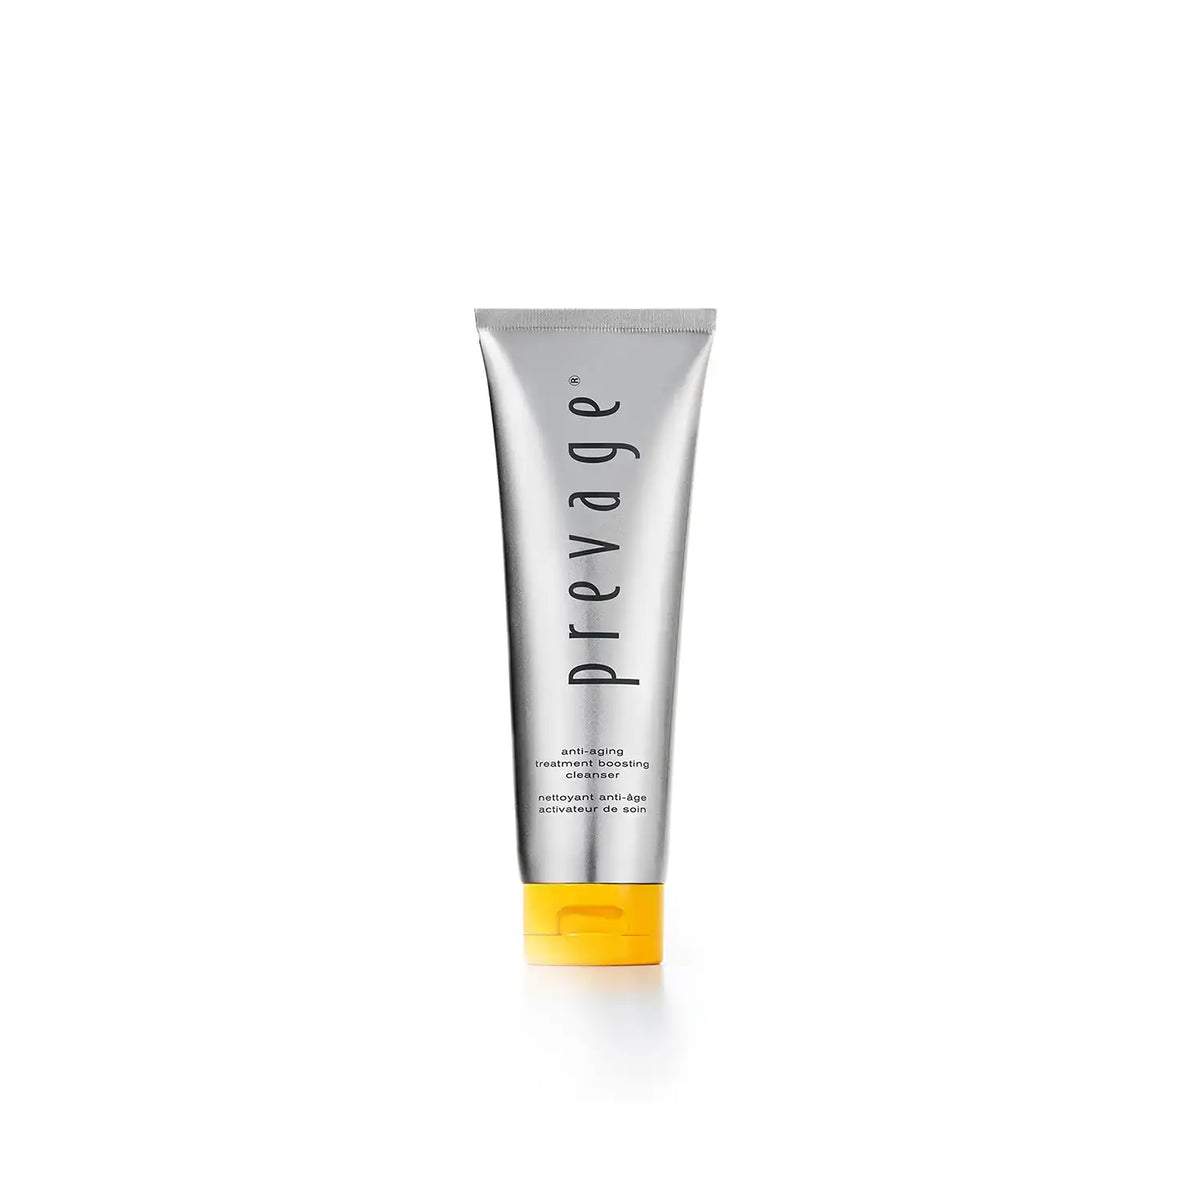 Prevage® Anti-Aging Treatment Boosting Cleanser 125ml